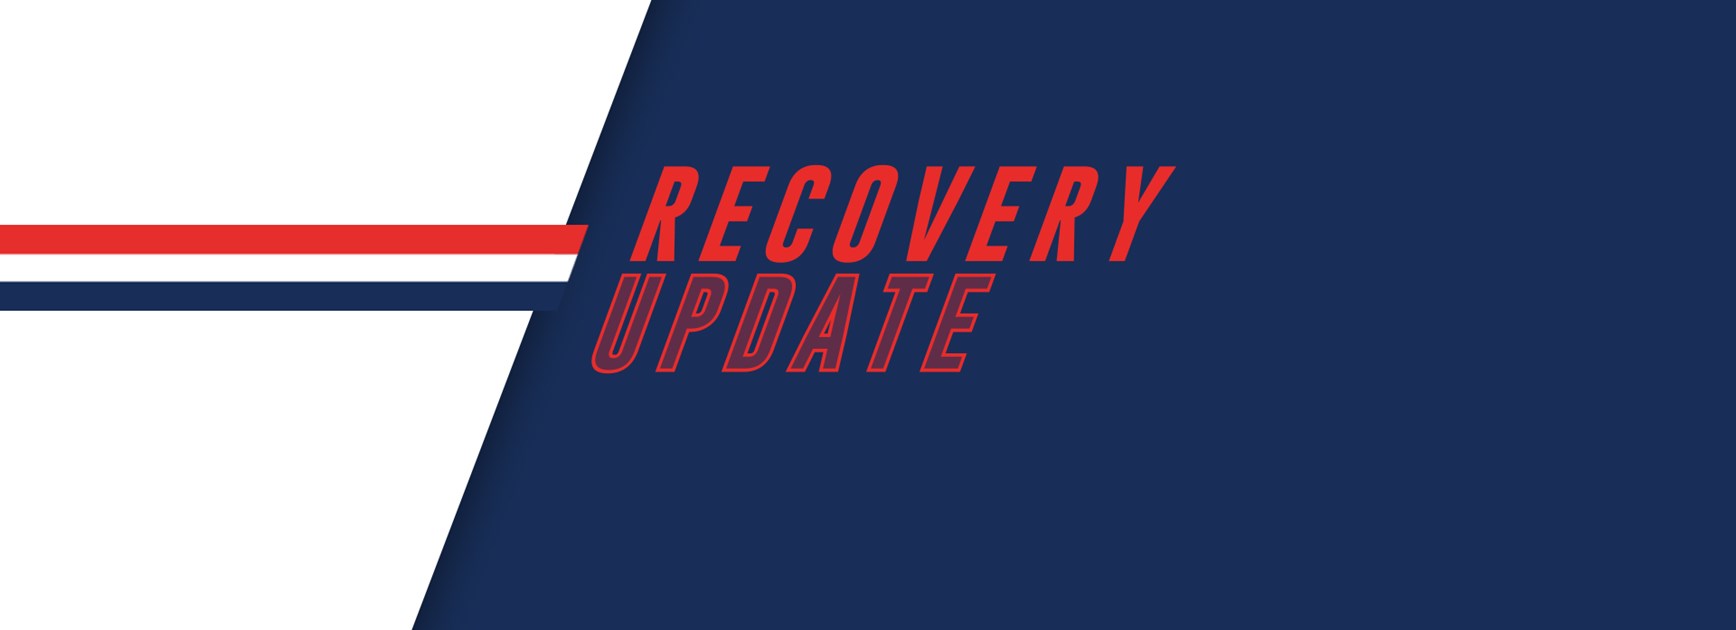 Recovery Update Round 1